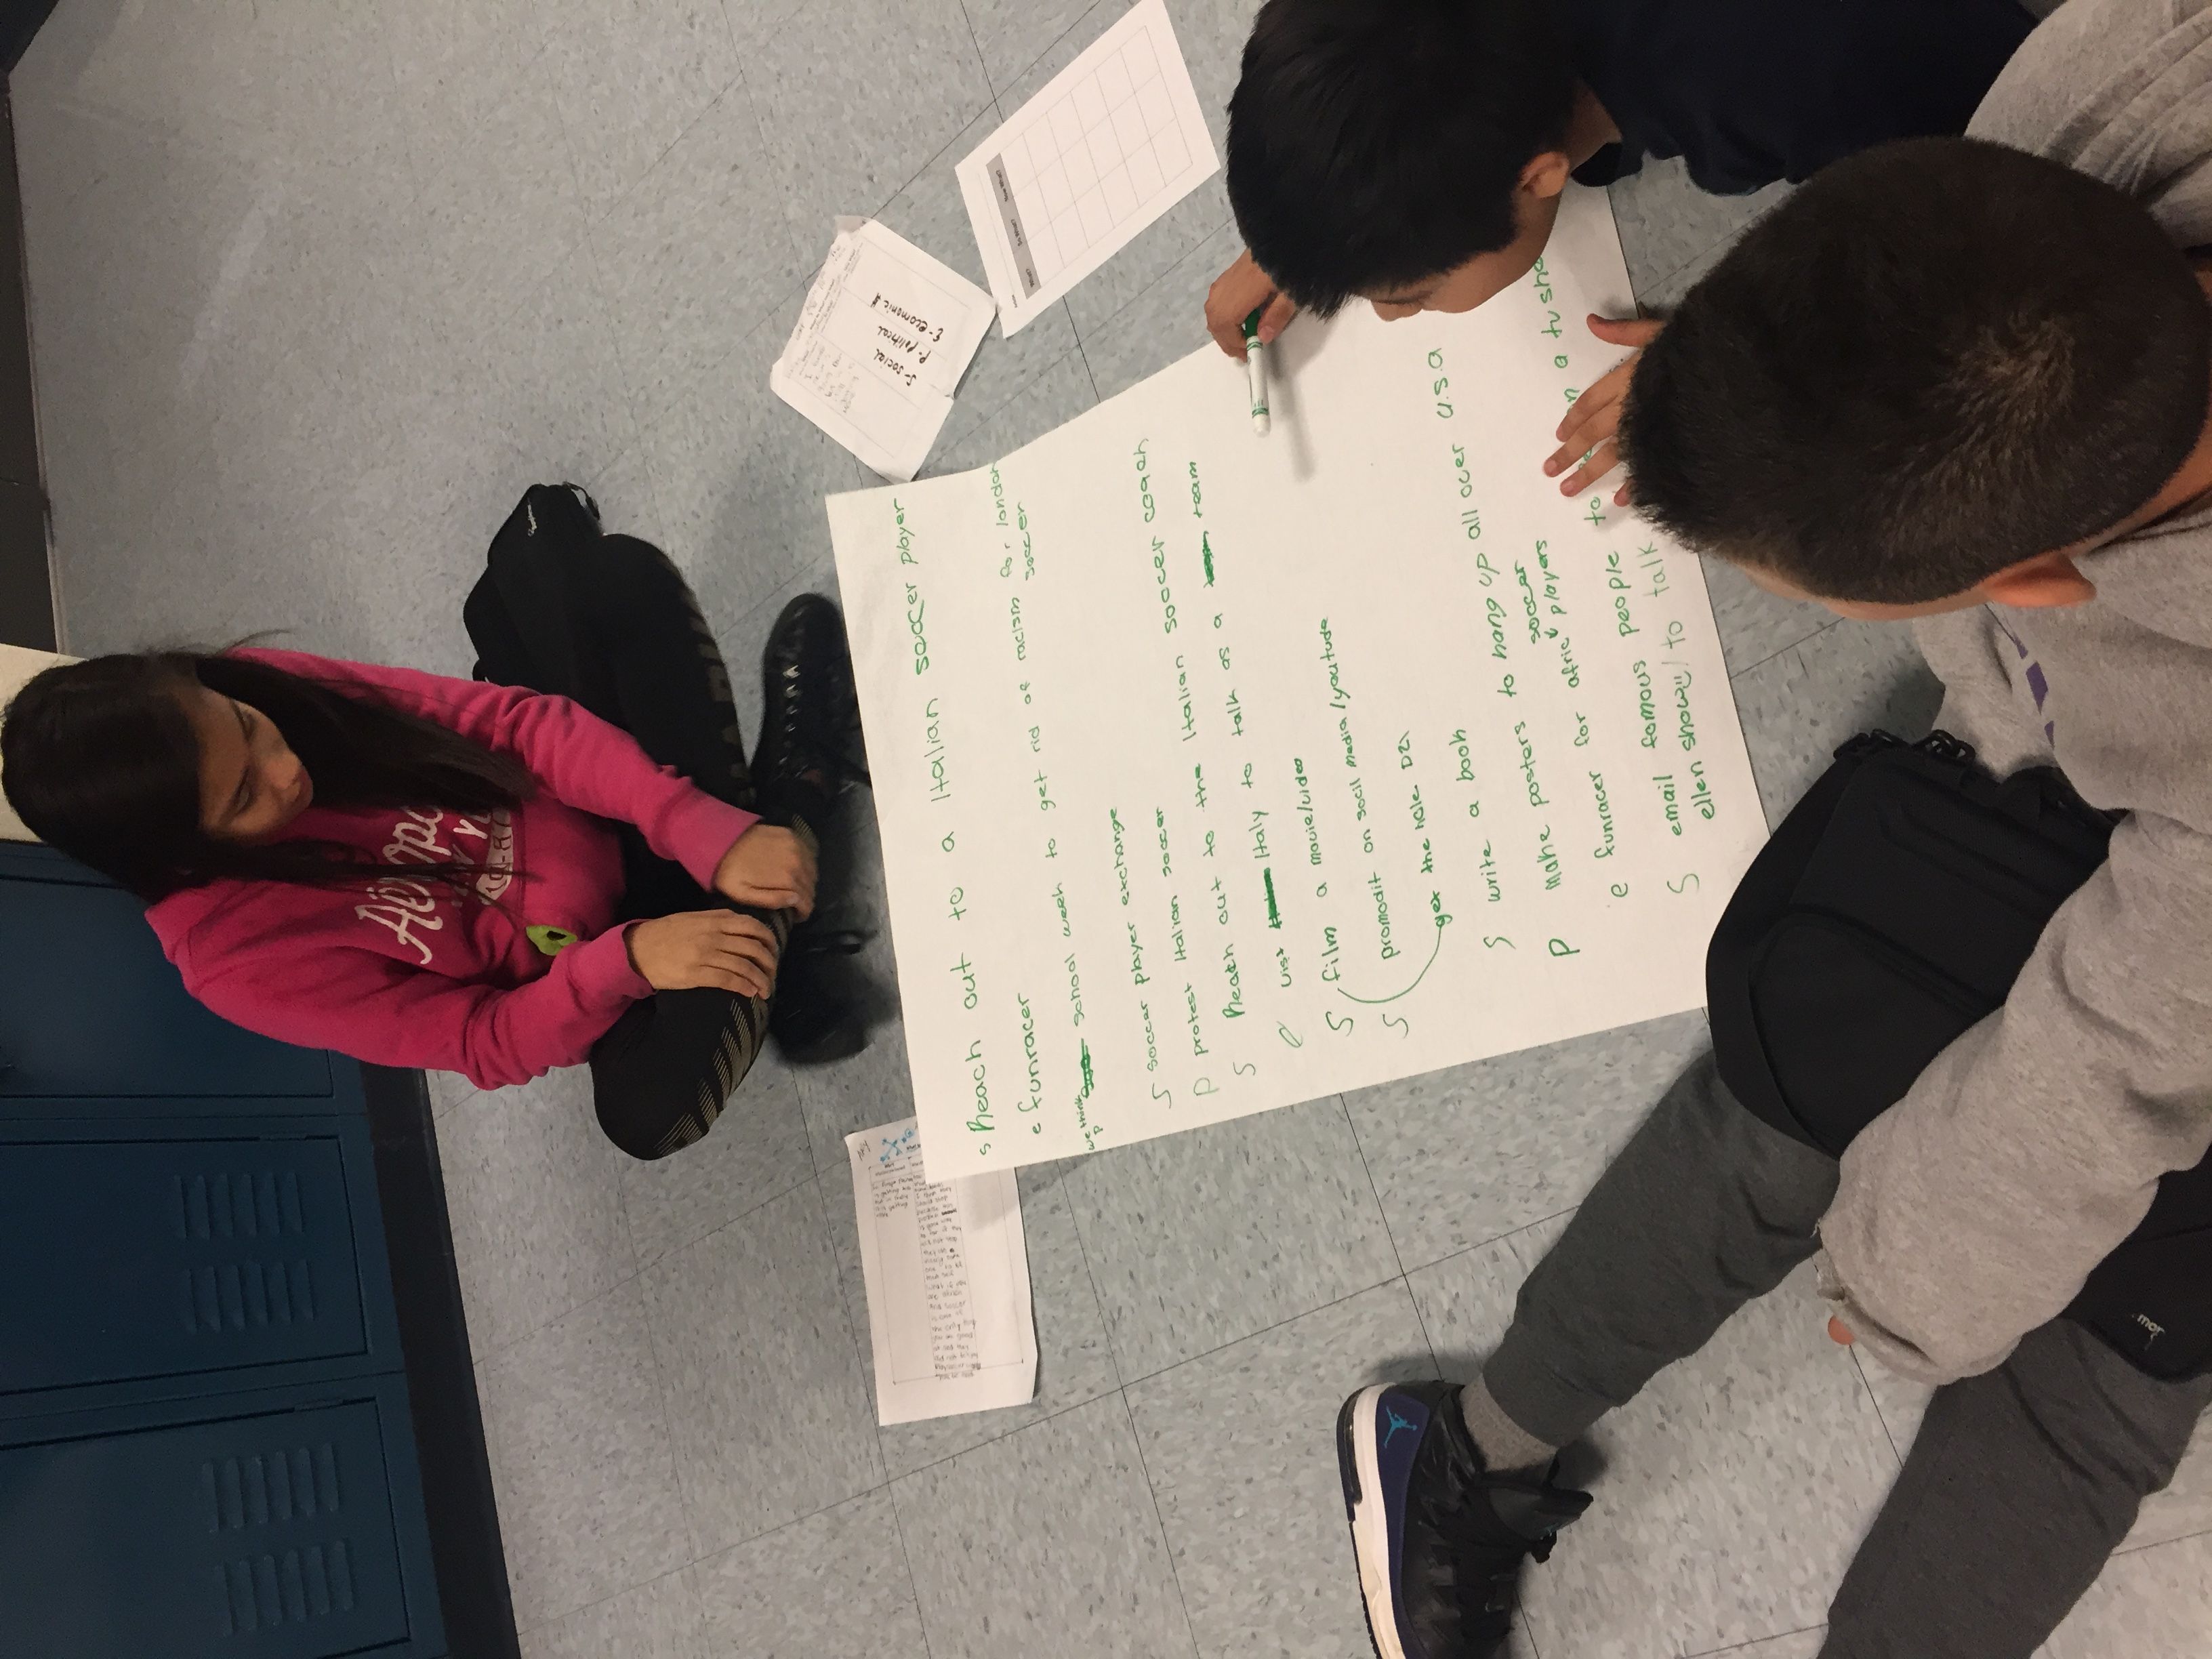 Students brainstorm solutions to challenges facing present-day Egypt, Greece, and Rome. Image courtesy of Tracy Crowley. United States, 2018.